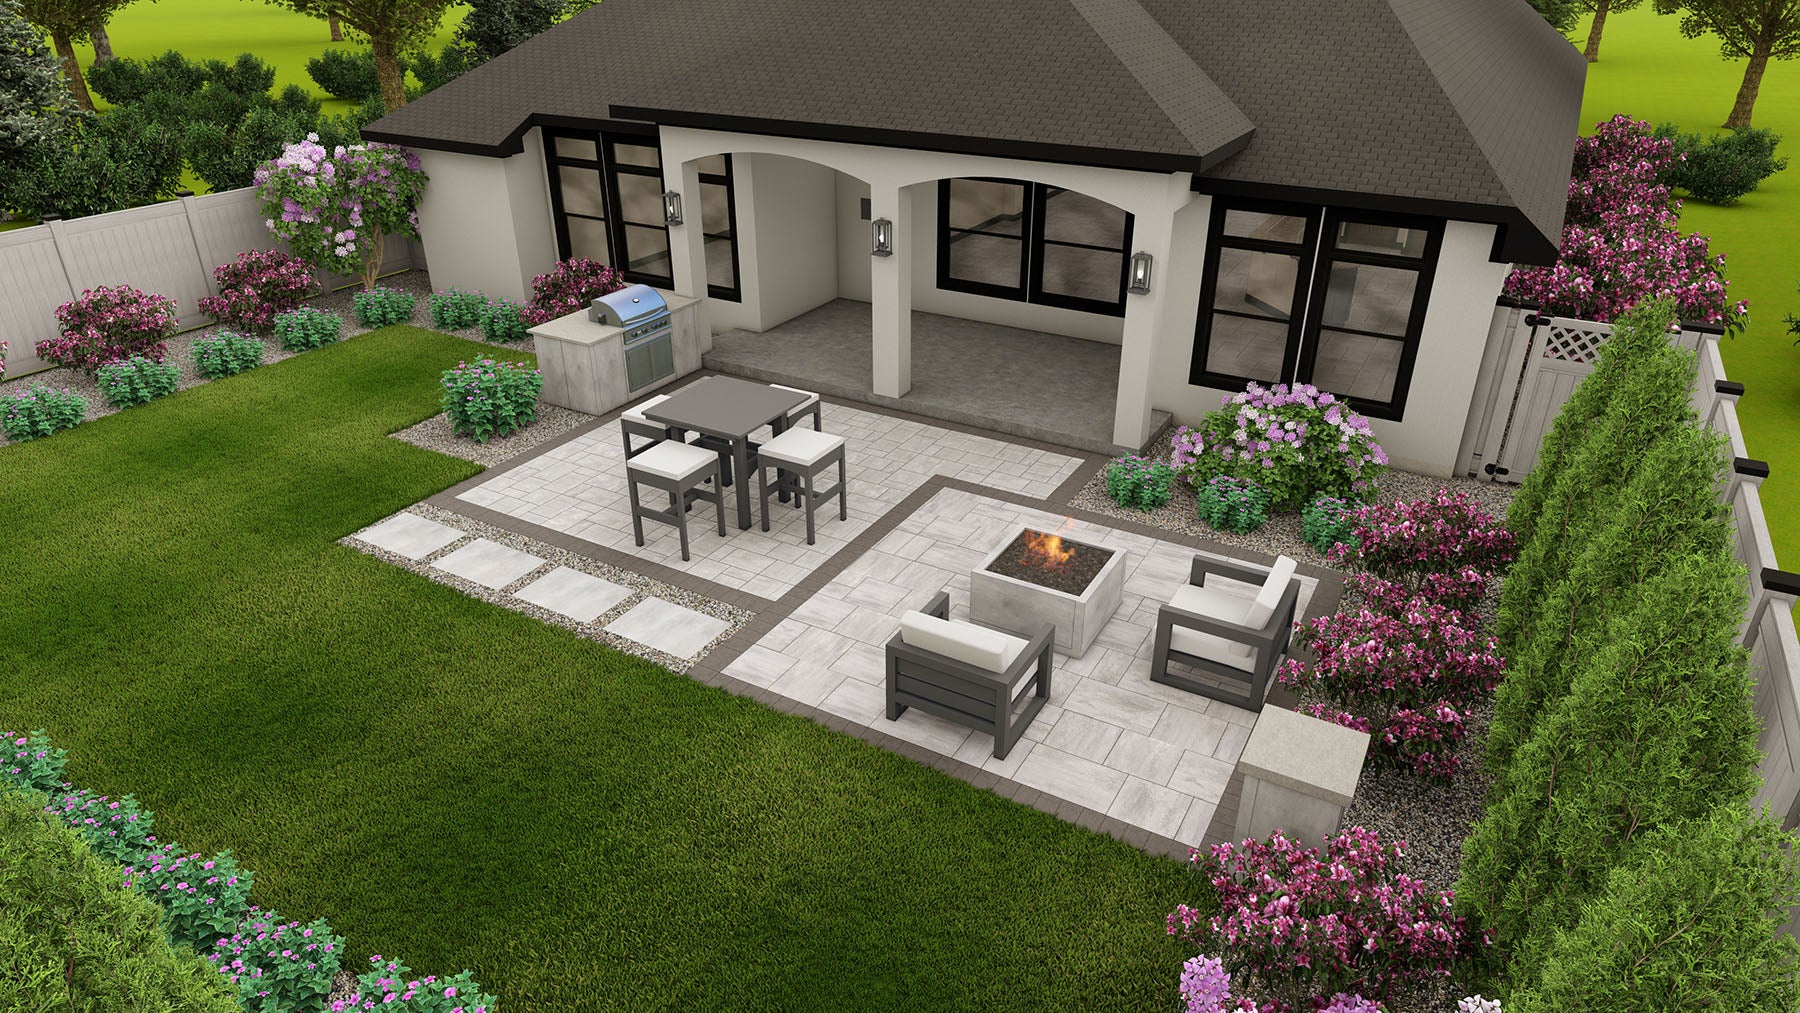 Image features Belgard Backyard + Package 3, Dimensions™, Patio with built-in fire pit and built-in grill.